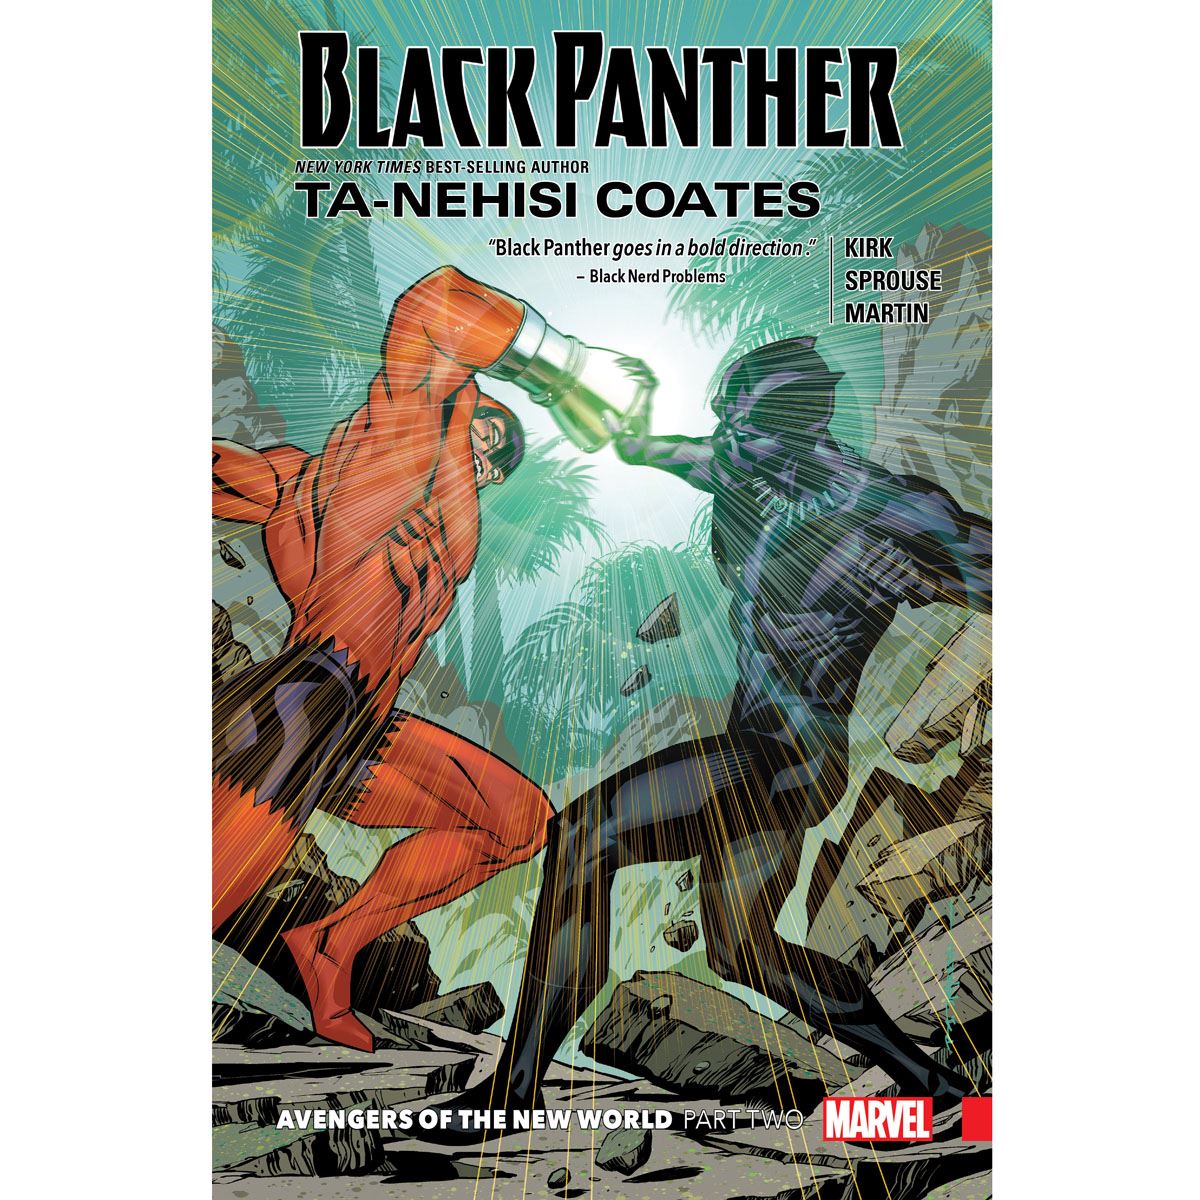 Comic Black panther book 5. Avengers of the new world part 2